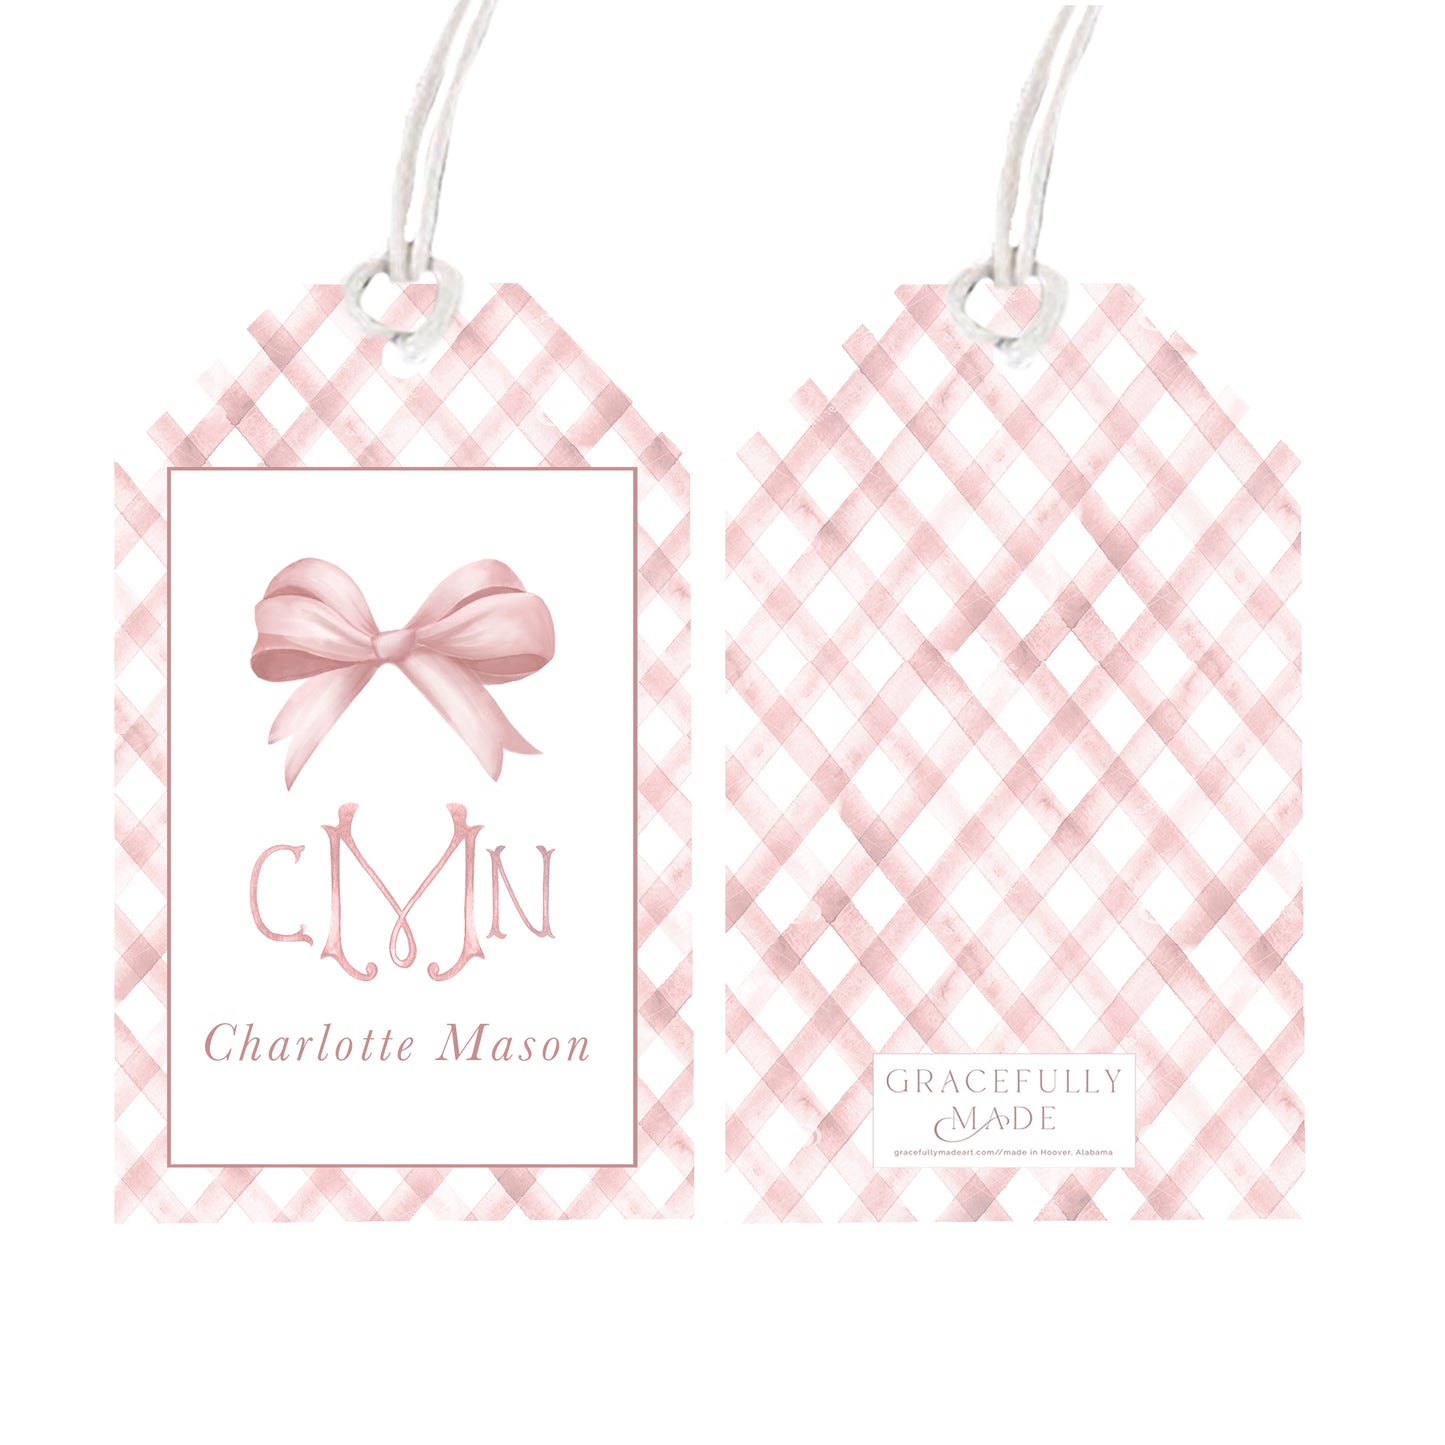 Personalized pink bow gift tags